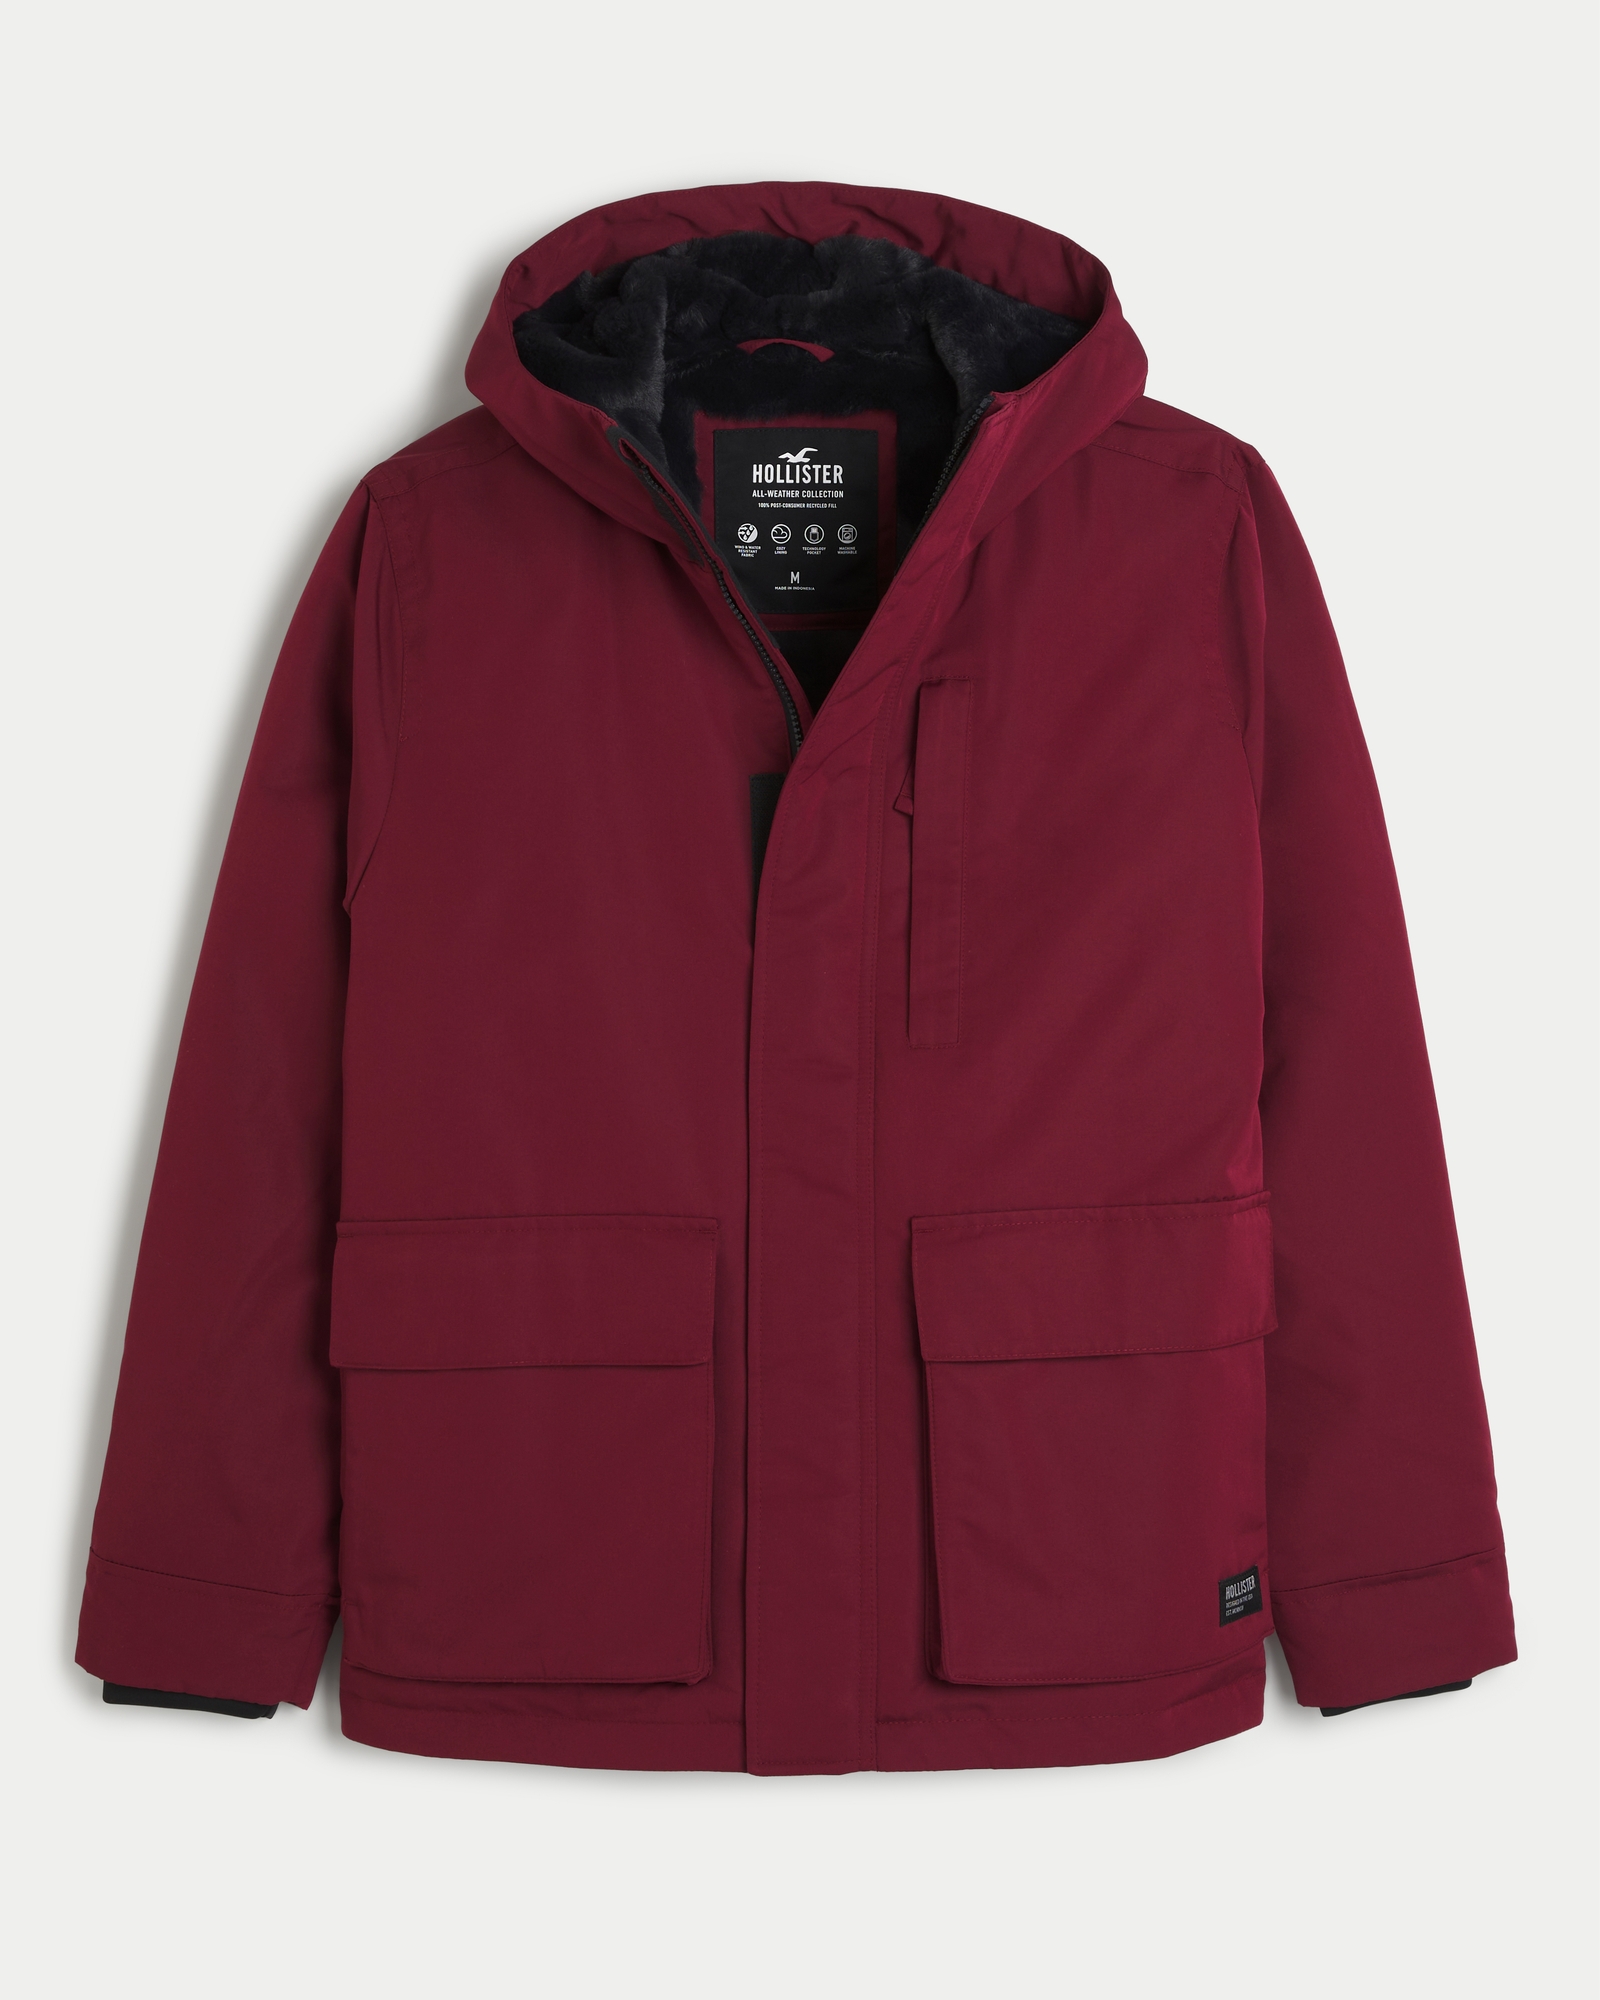 Hollister mens all-weather collection - Gem